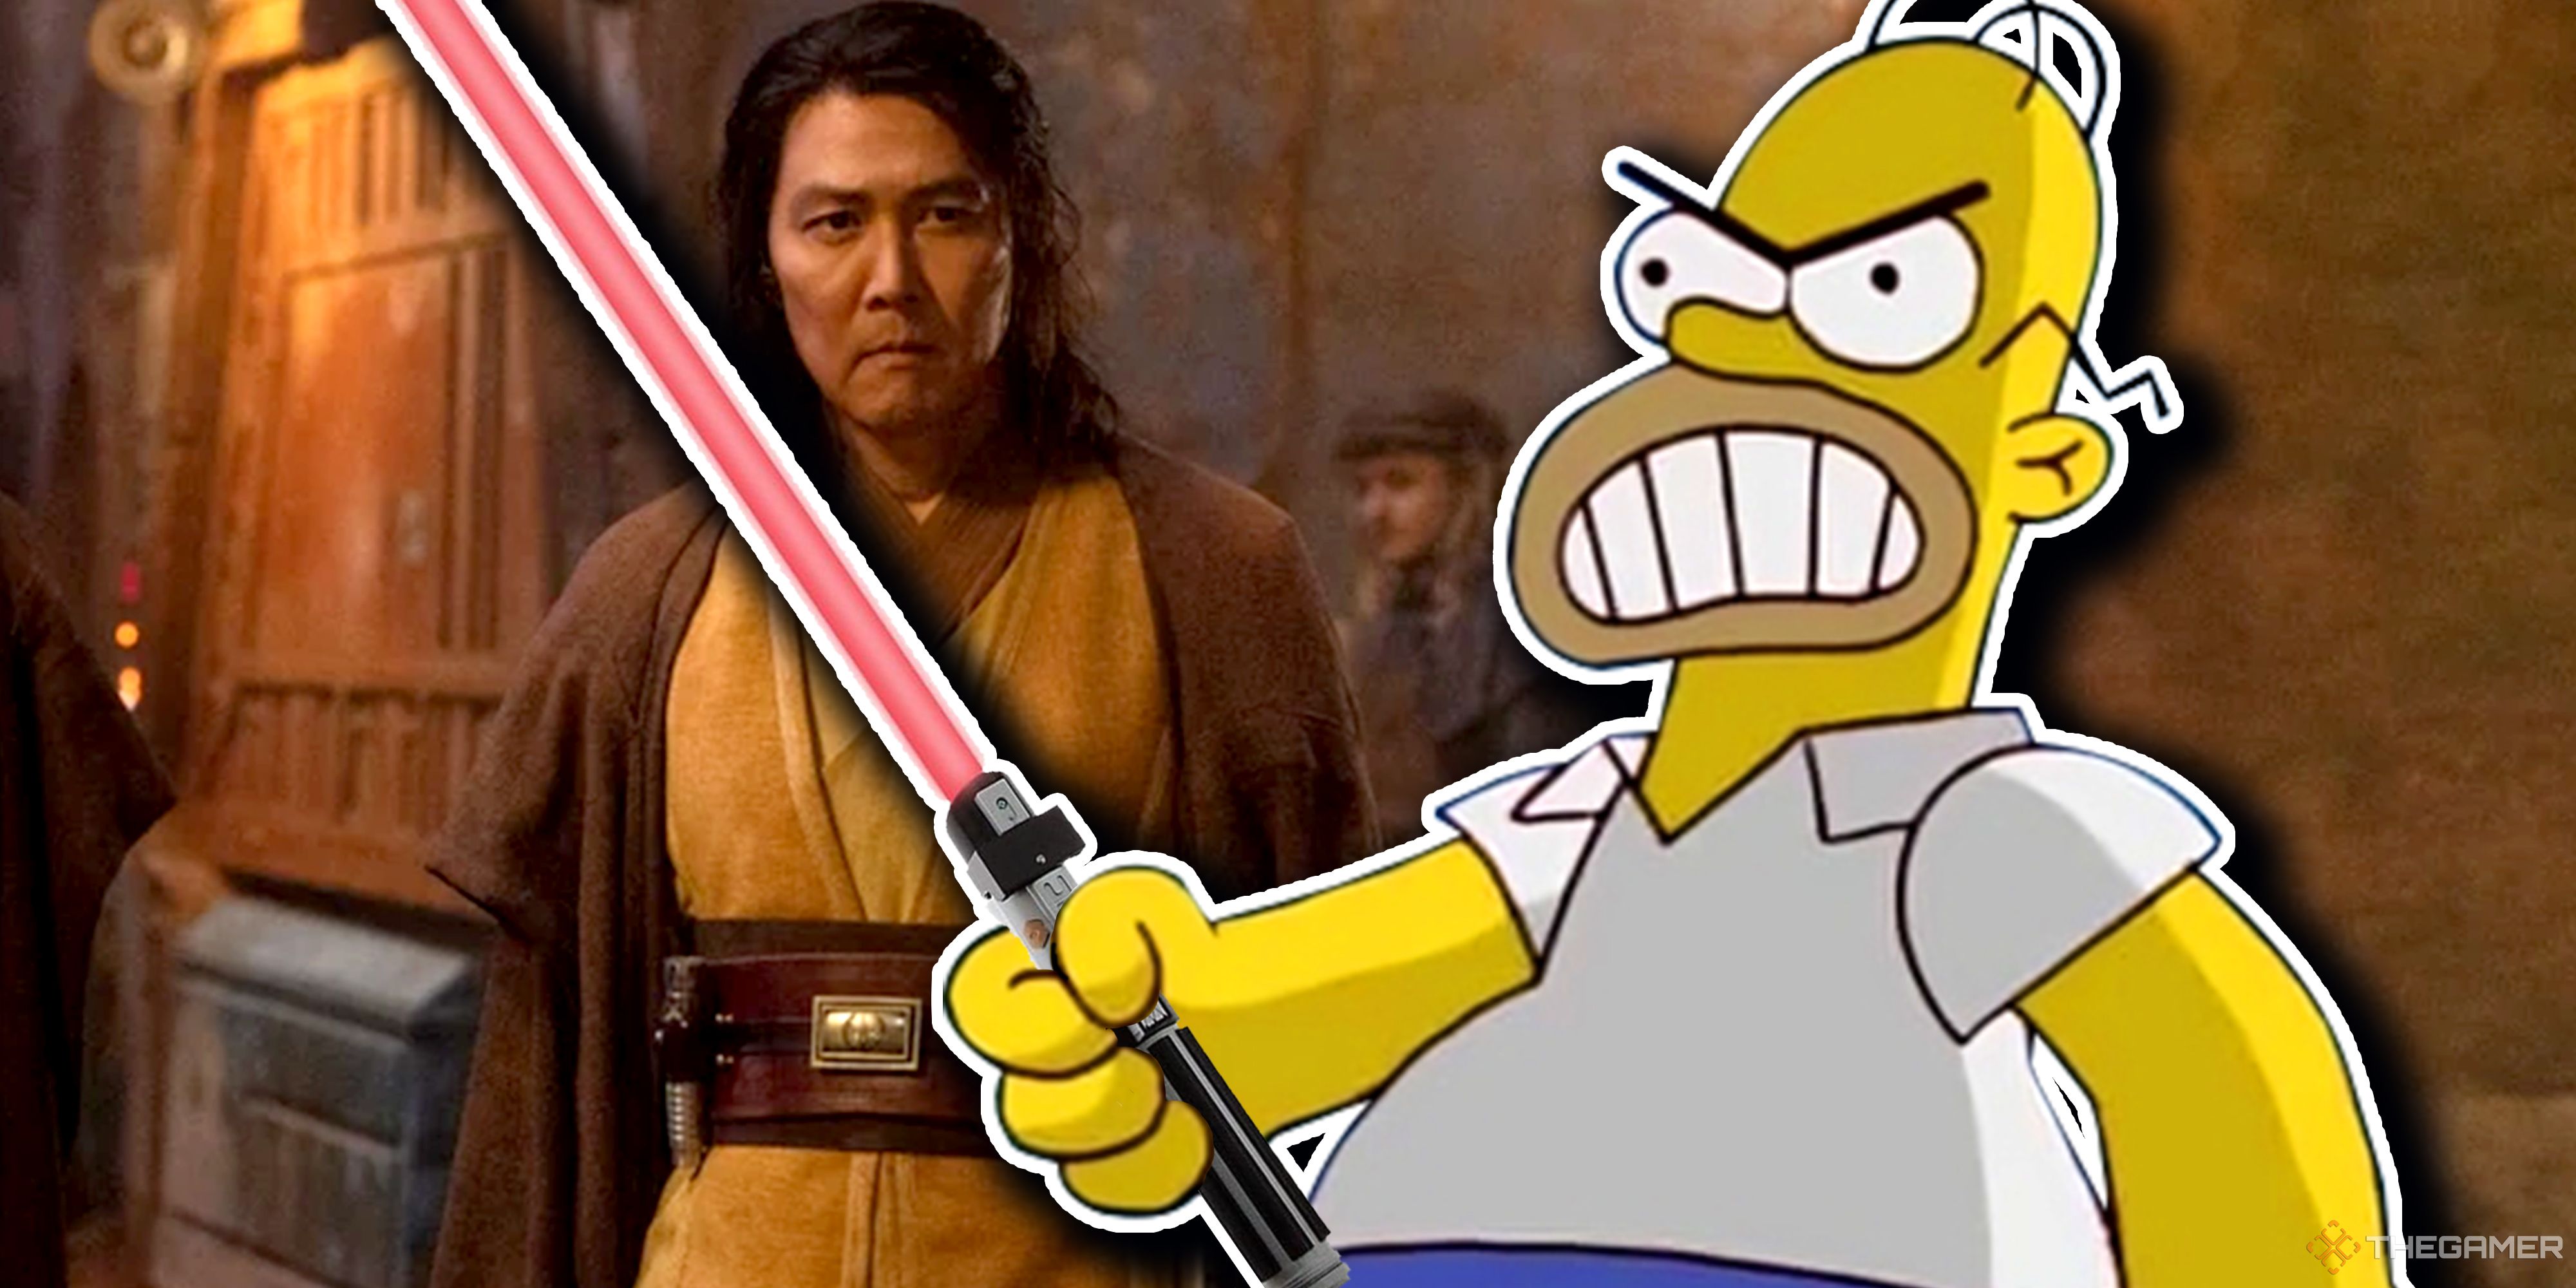 An angry Homer Simpson brandishing a lightsaber in front of Sol from The Acolyte